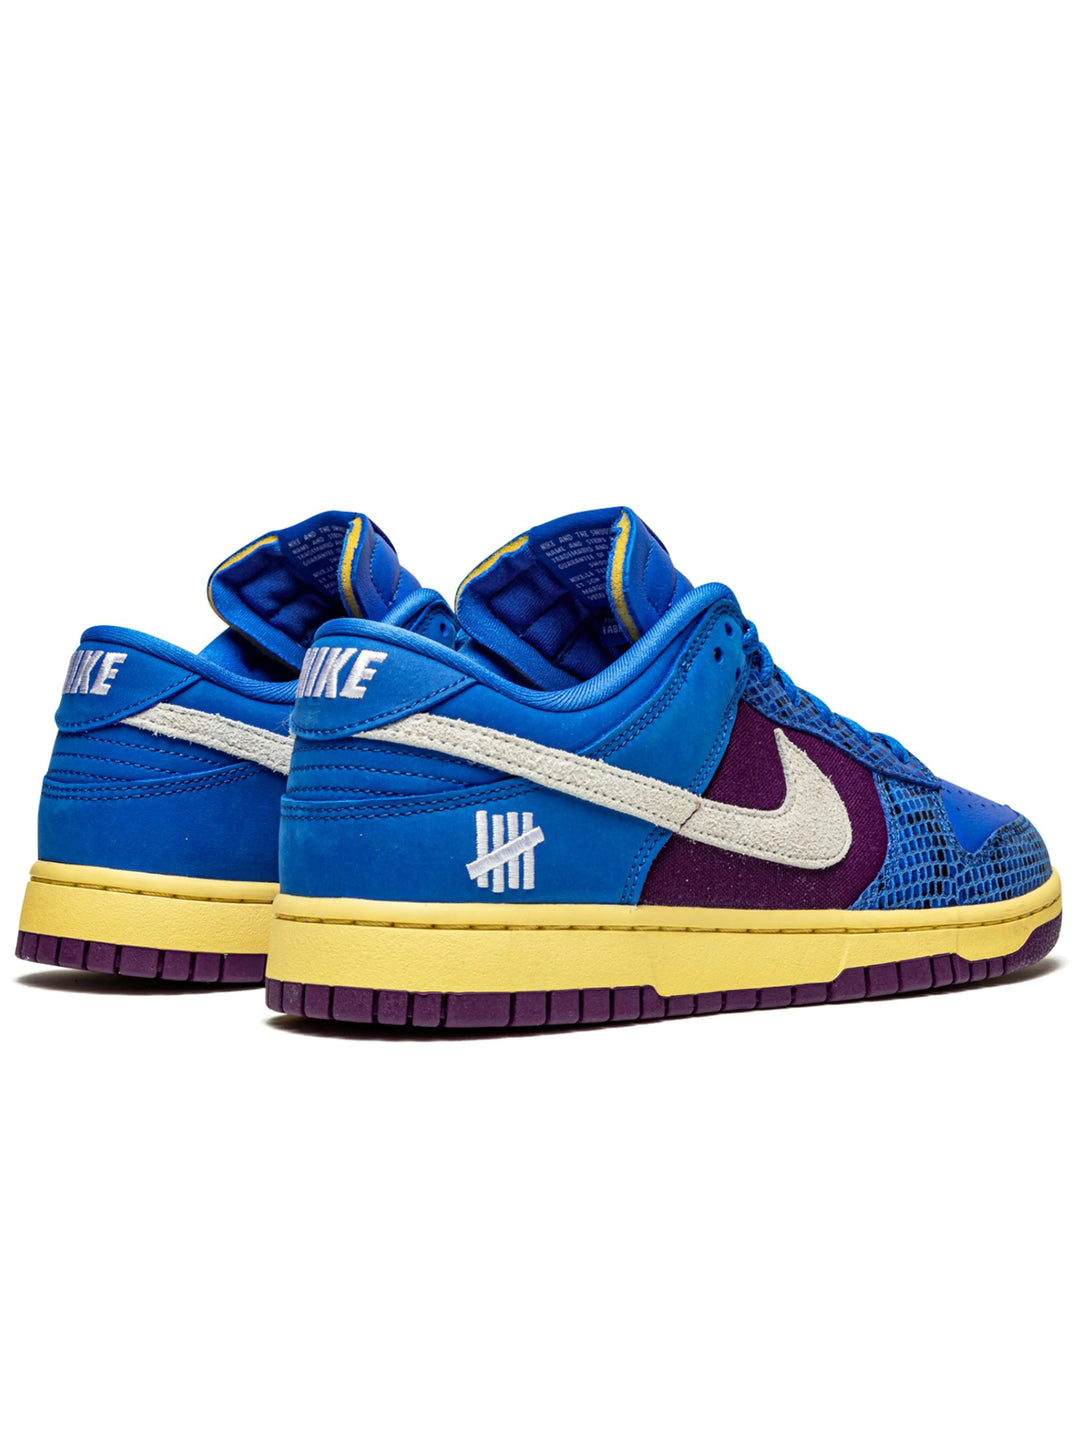 Nike Dunk Low Undefeated 5 On It Dunk vs. AF1 Prior